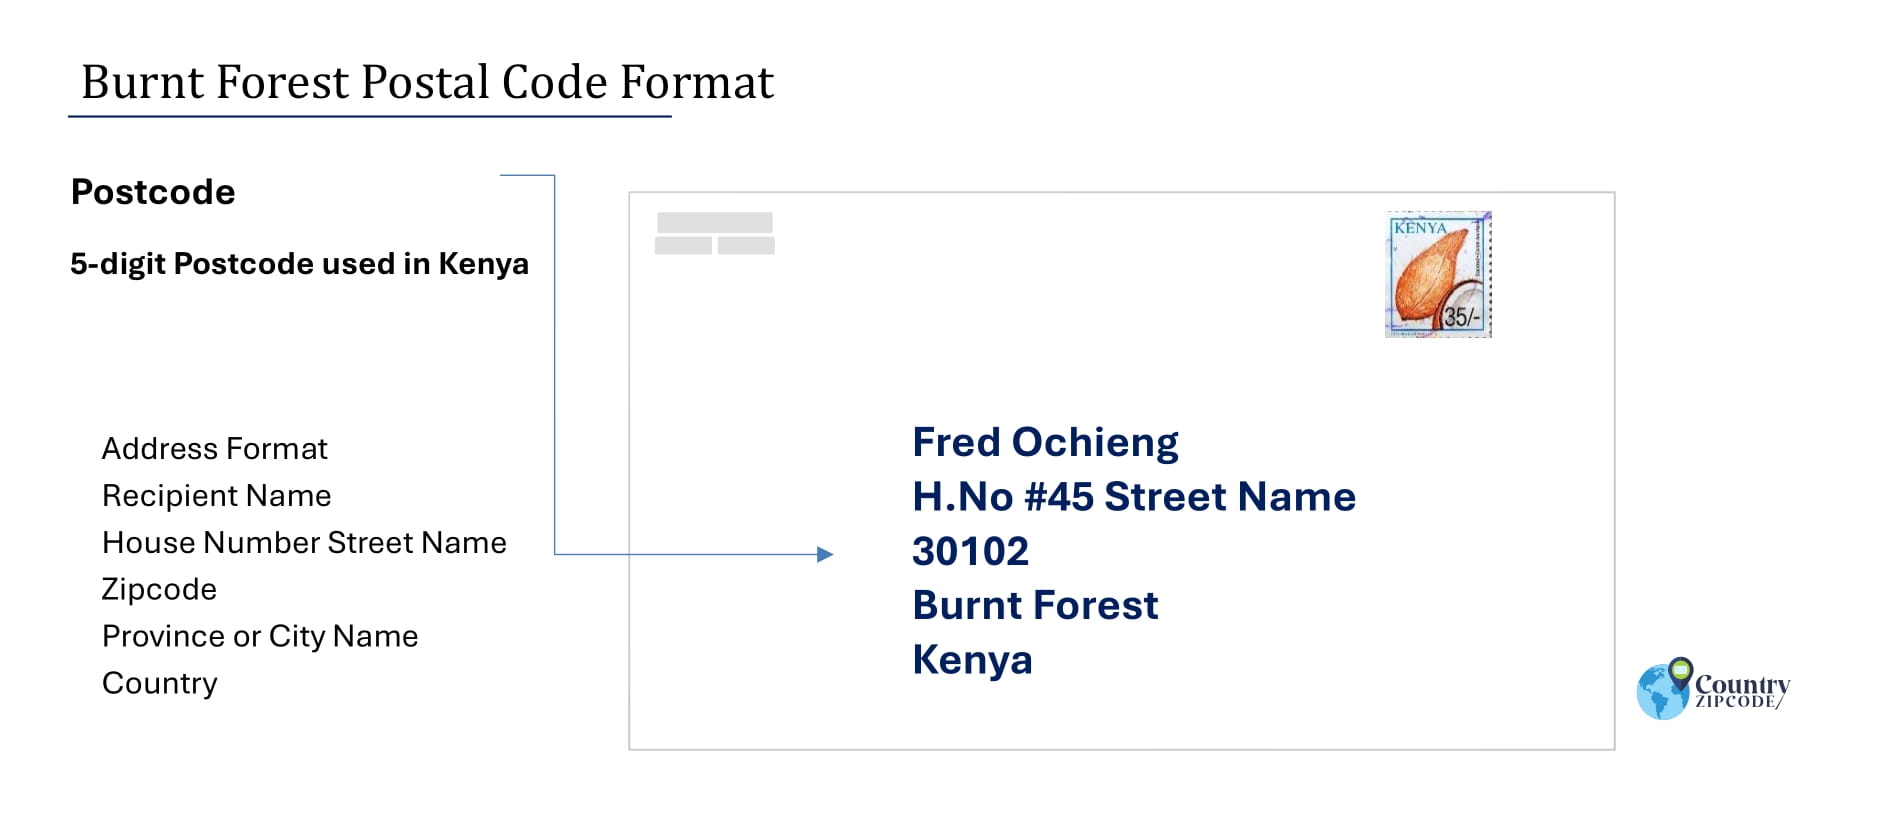 Example of Burnt Forest Address and postal code format